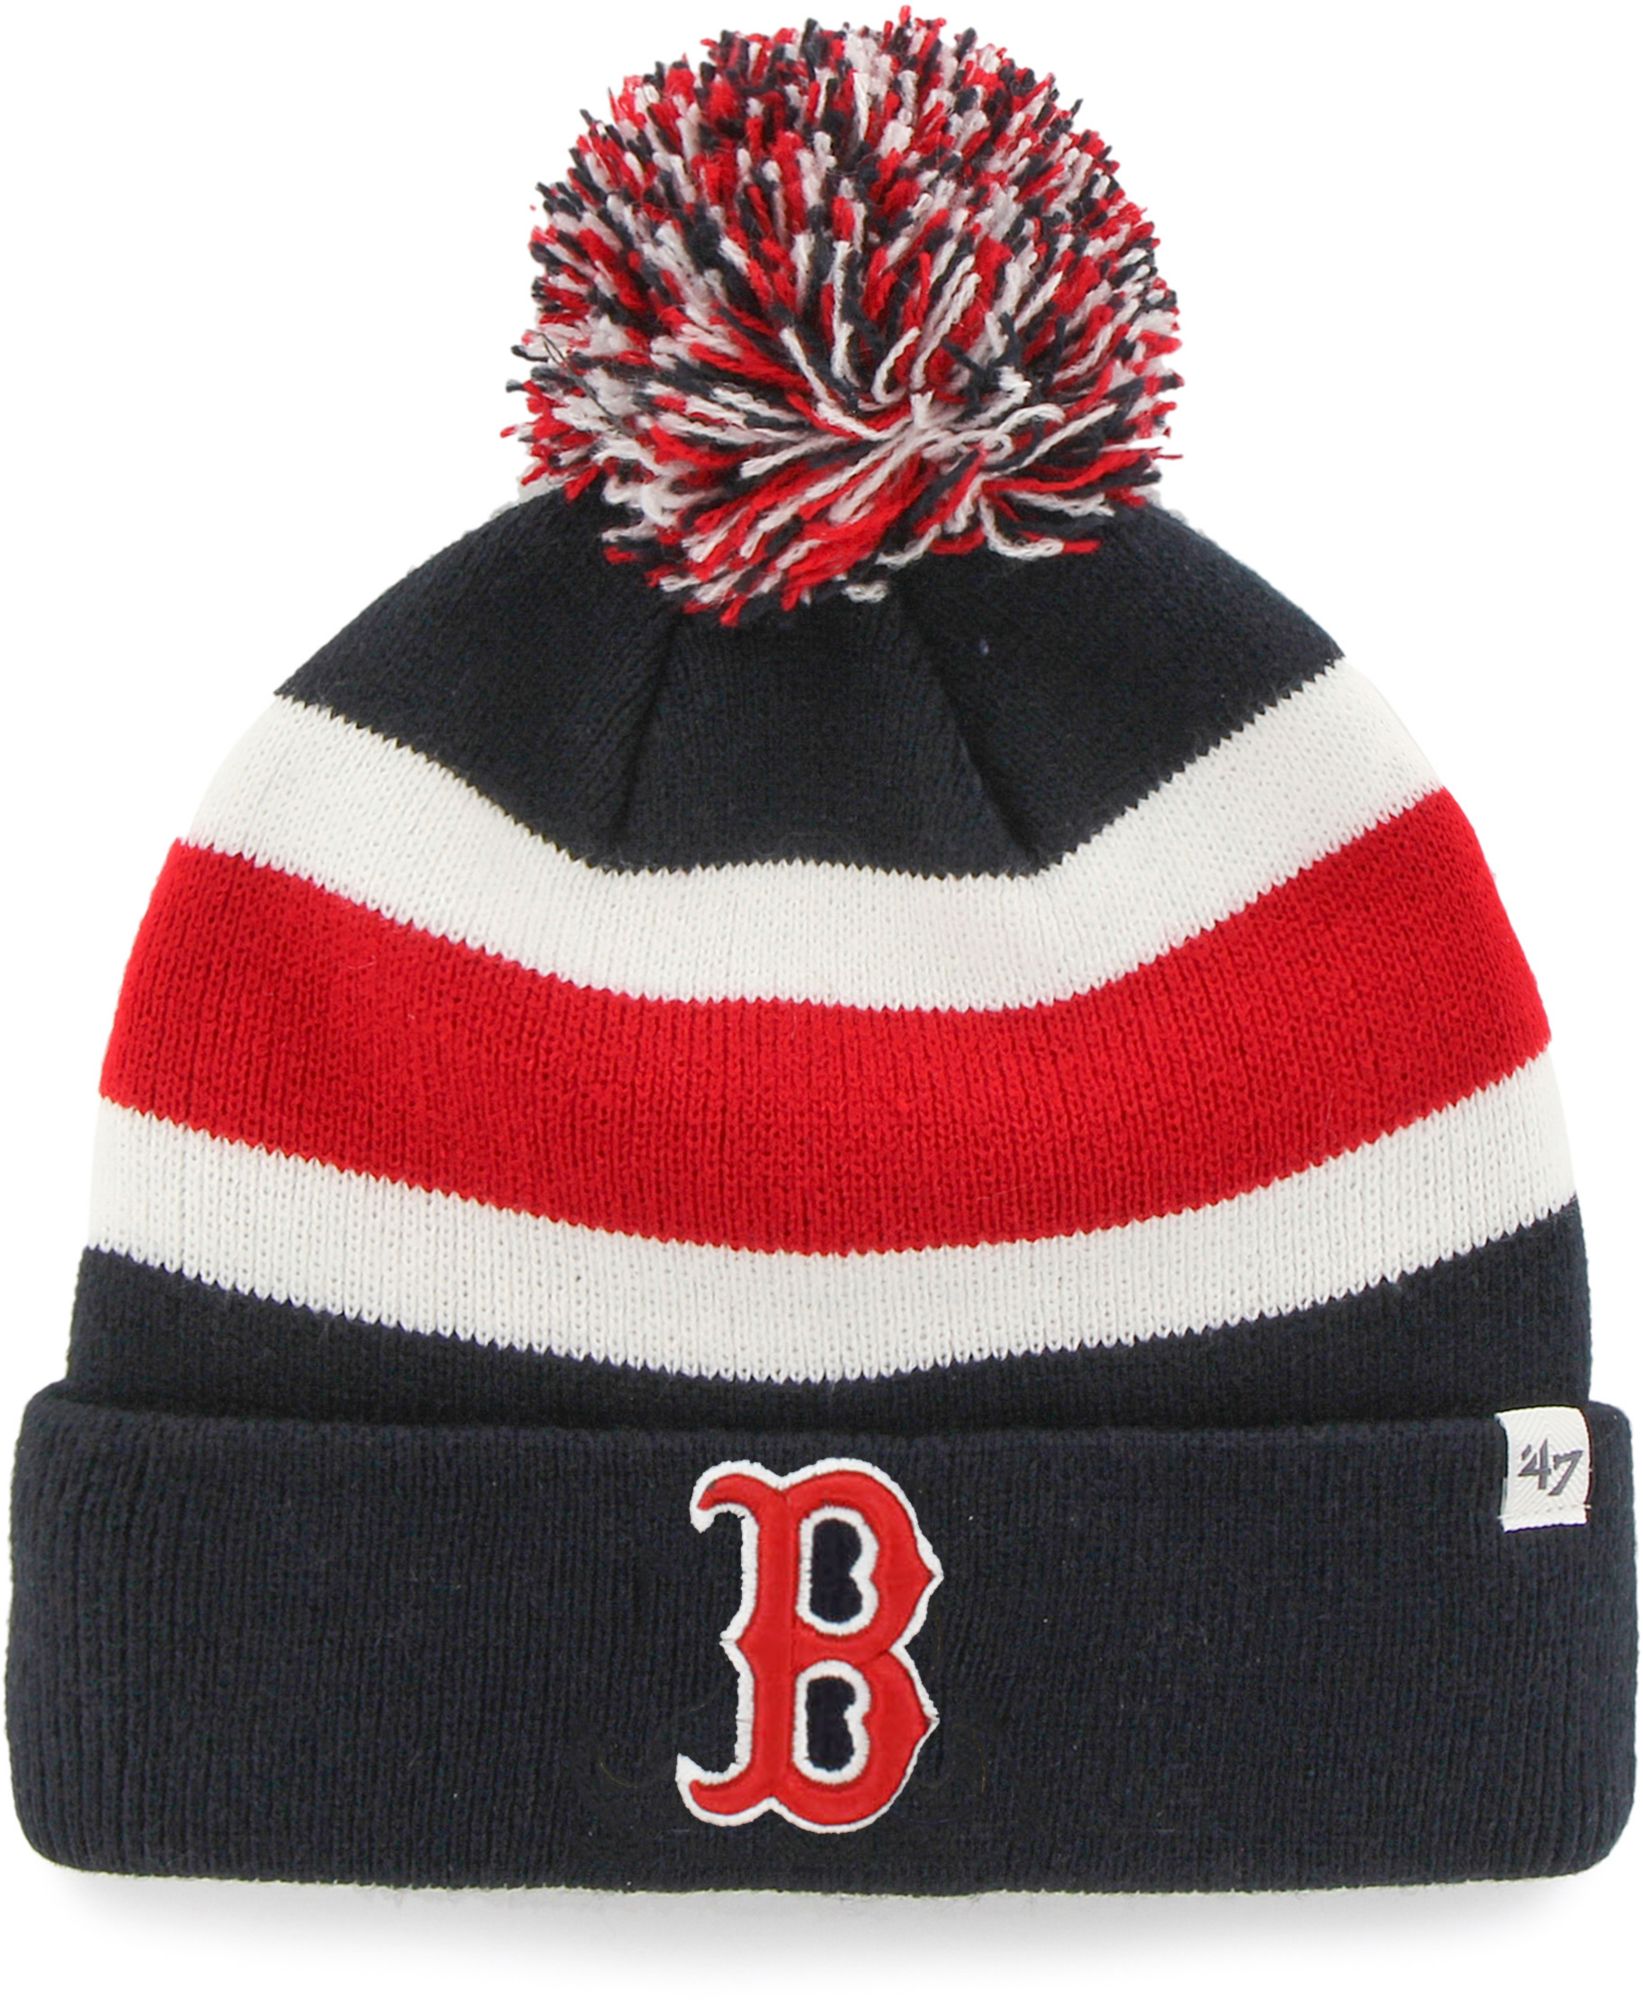 red sox championship winter hat